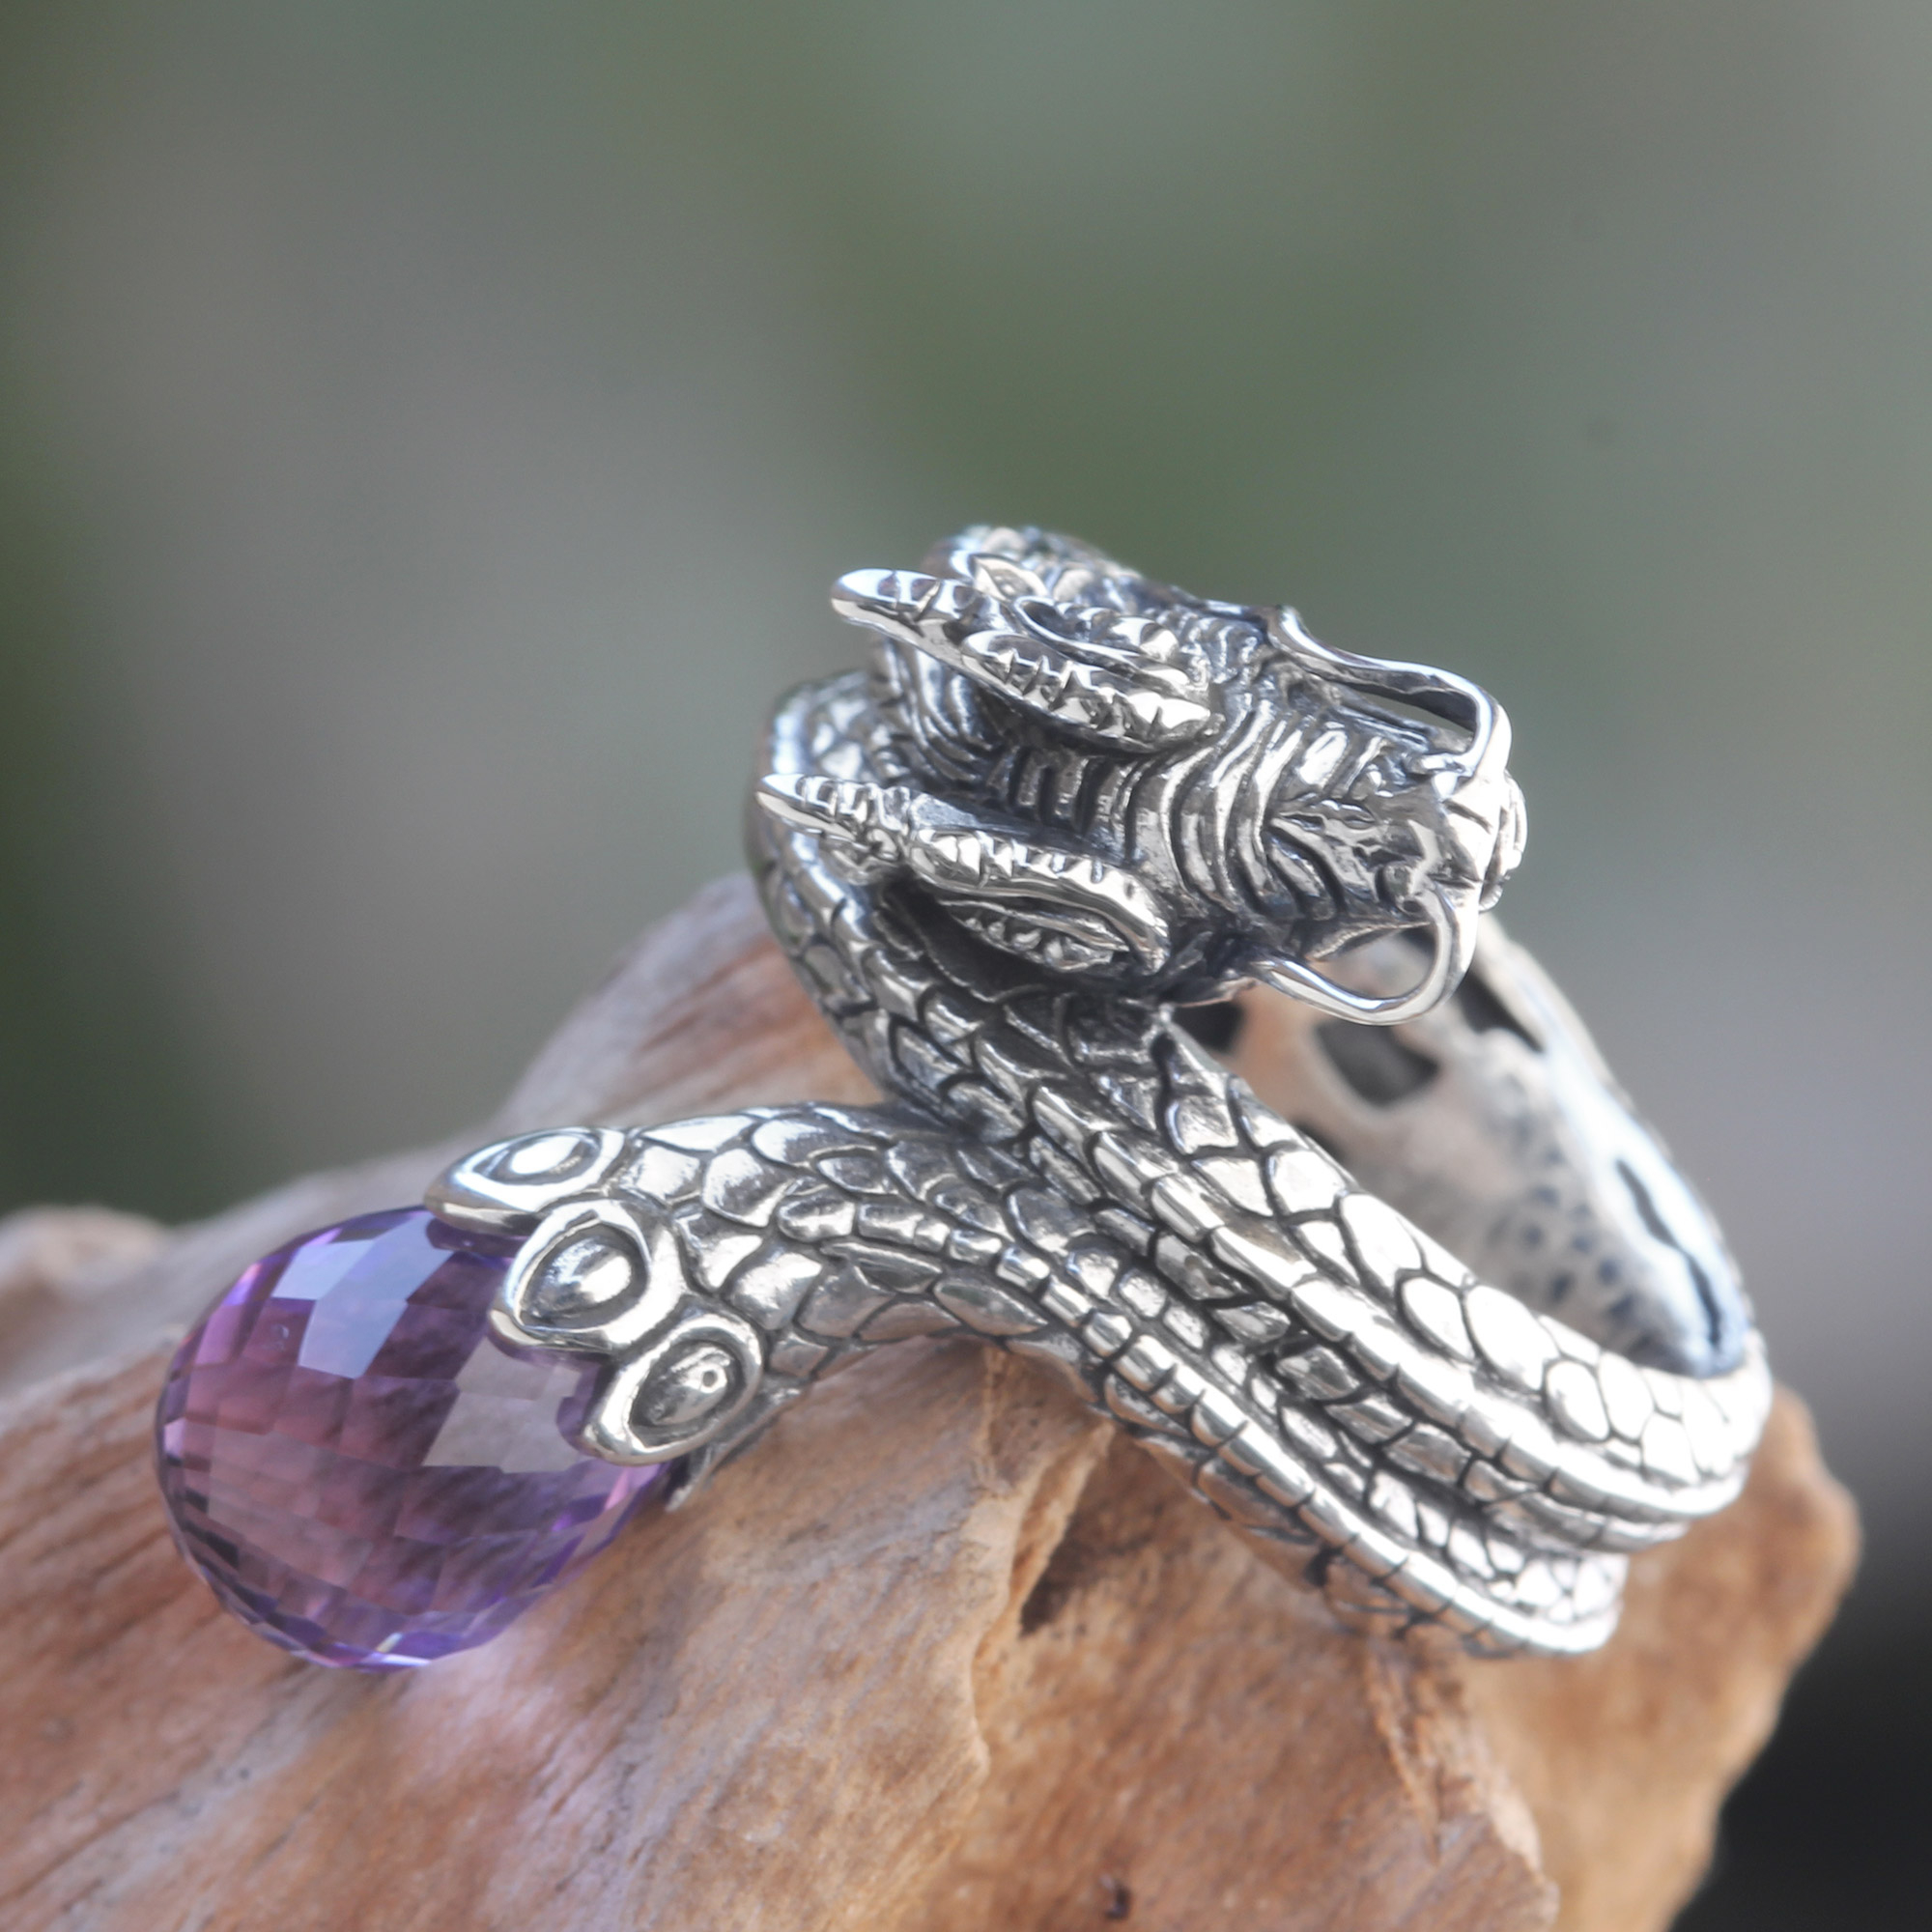 Original Artisan Crafted Silver Dragon Ring with Amethyst - Royal ...